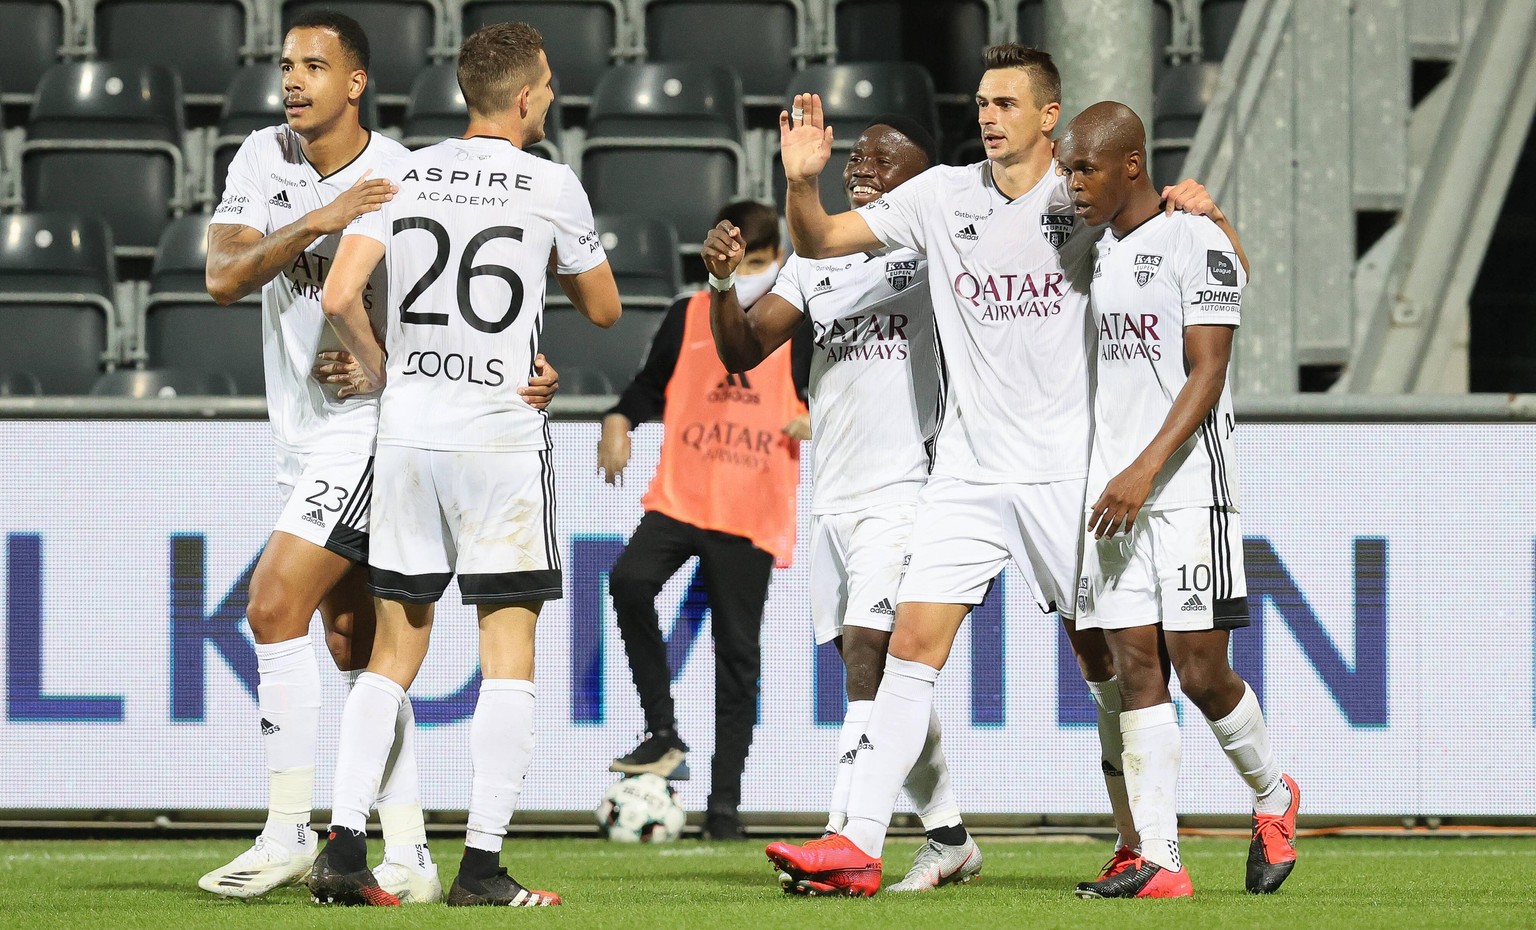 Eupen s Smail Prevljak celebrates after scoring during a soccer match between KAS Eupen and KAA Gent, Friday 11 September 2020 in Eupen, on day 5 of the Jupiler Pro League first division of the Belgia ...